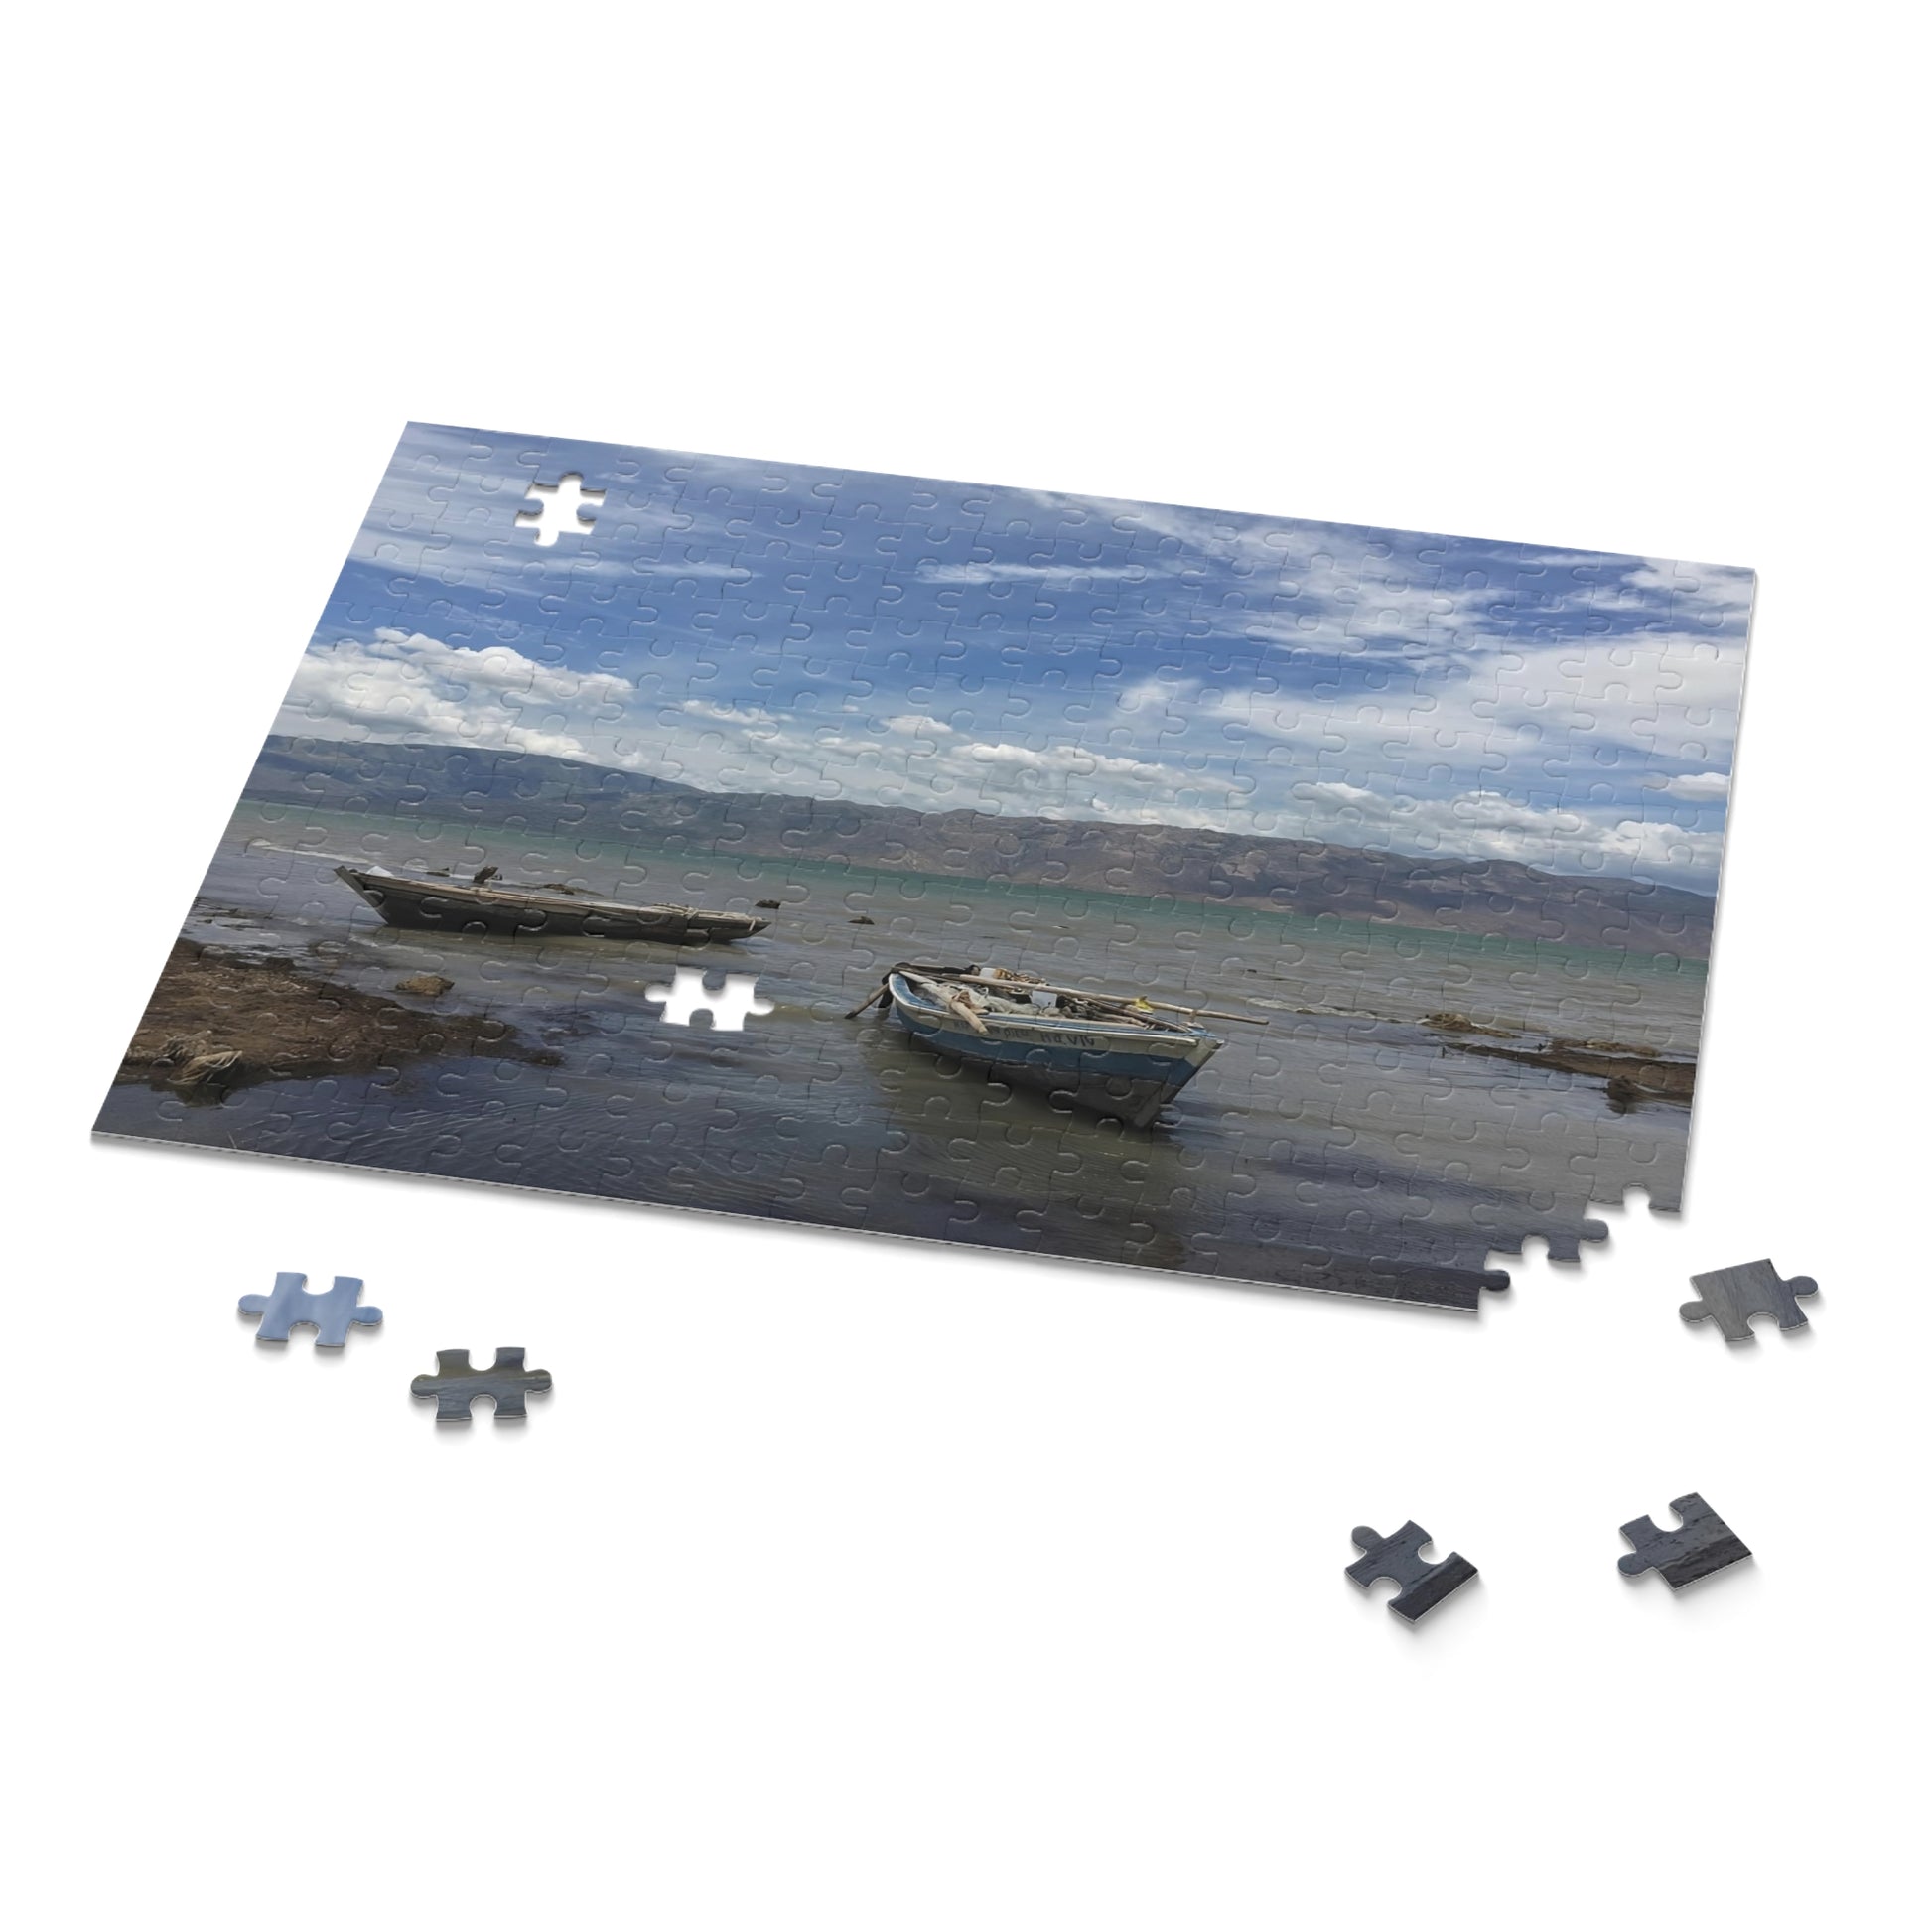 252 pieces make this puzzle a great activity for all ages and encourages important conversations with those you love. 